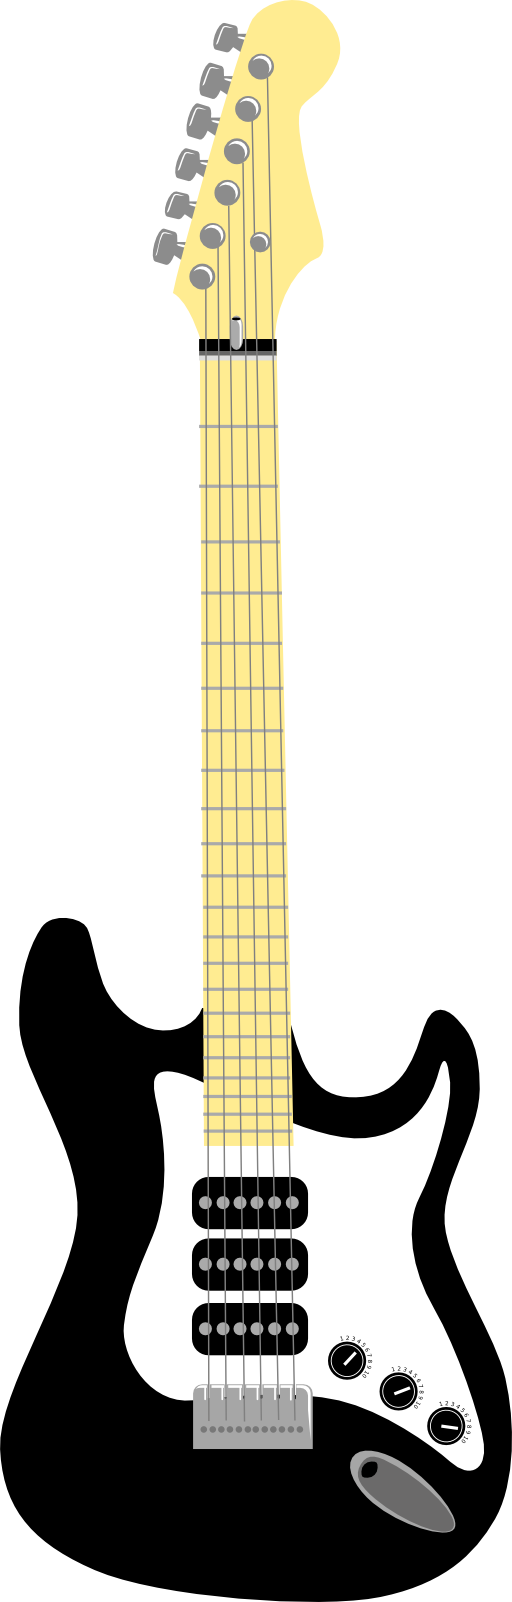 Images For > Cross Guitar Clipart